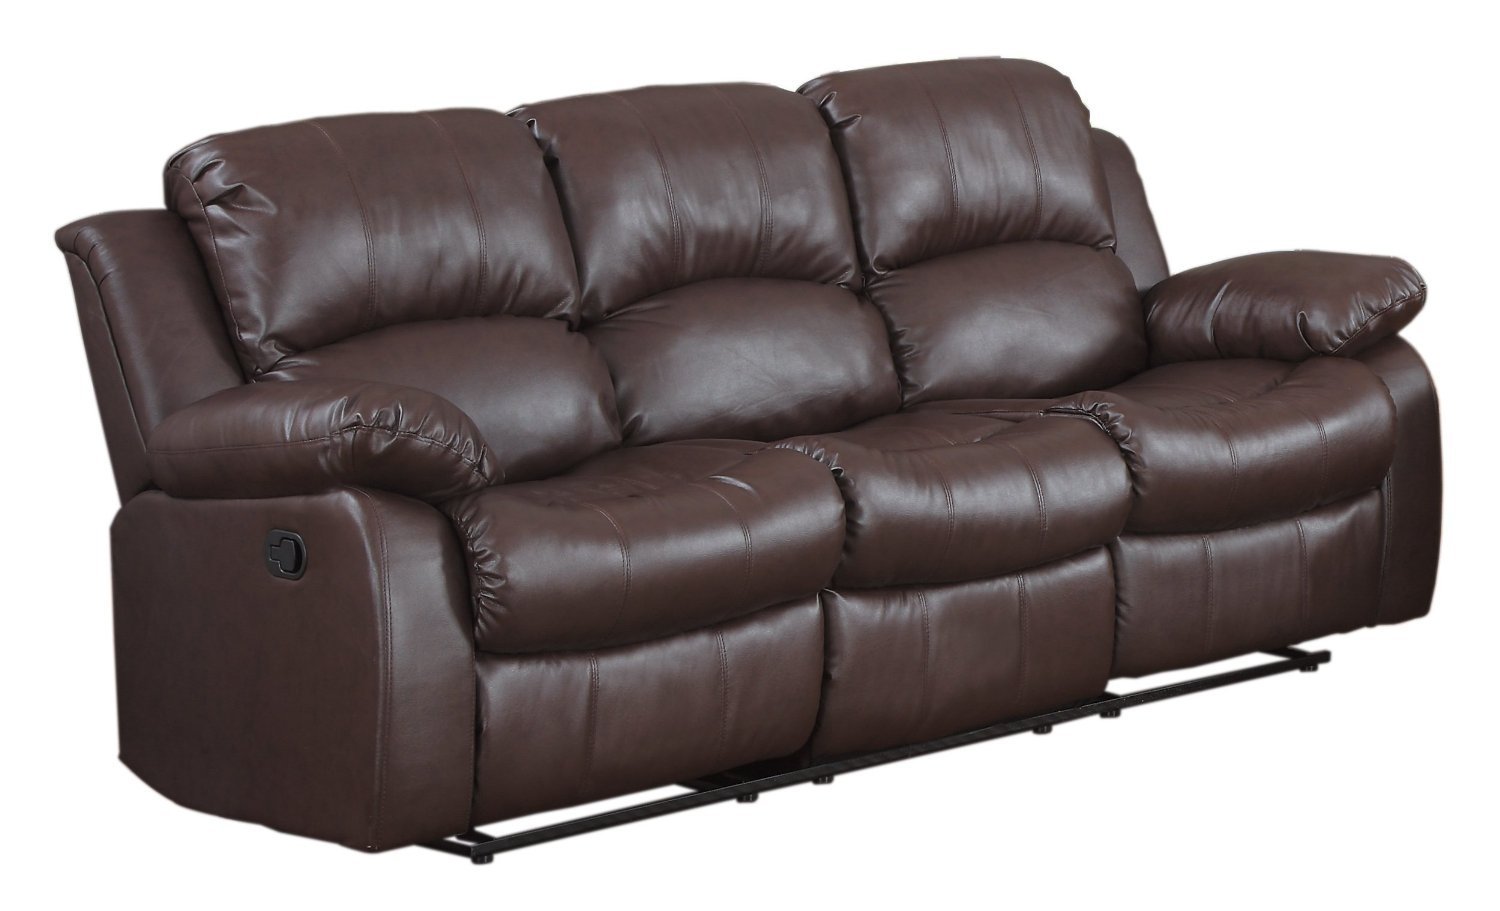 Elegant Amazon.com: Bonded Leather Double Recliner Sofa Living Room Reclining Couch  (Brown): Kitchen reclining leather sofa